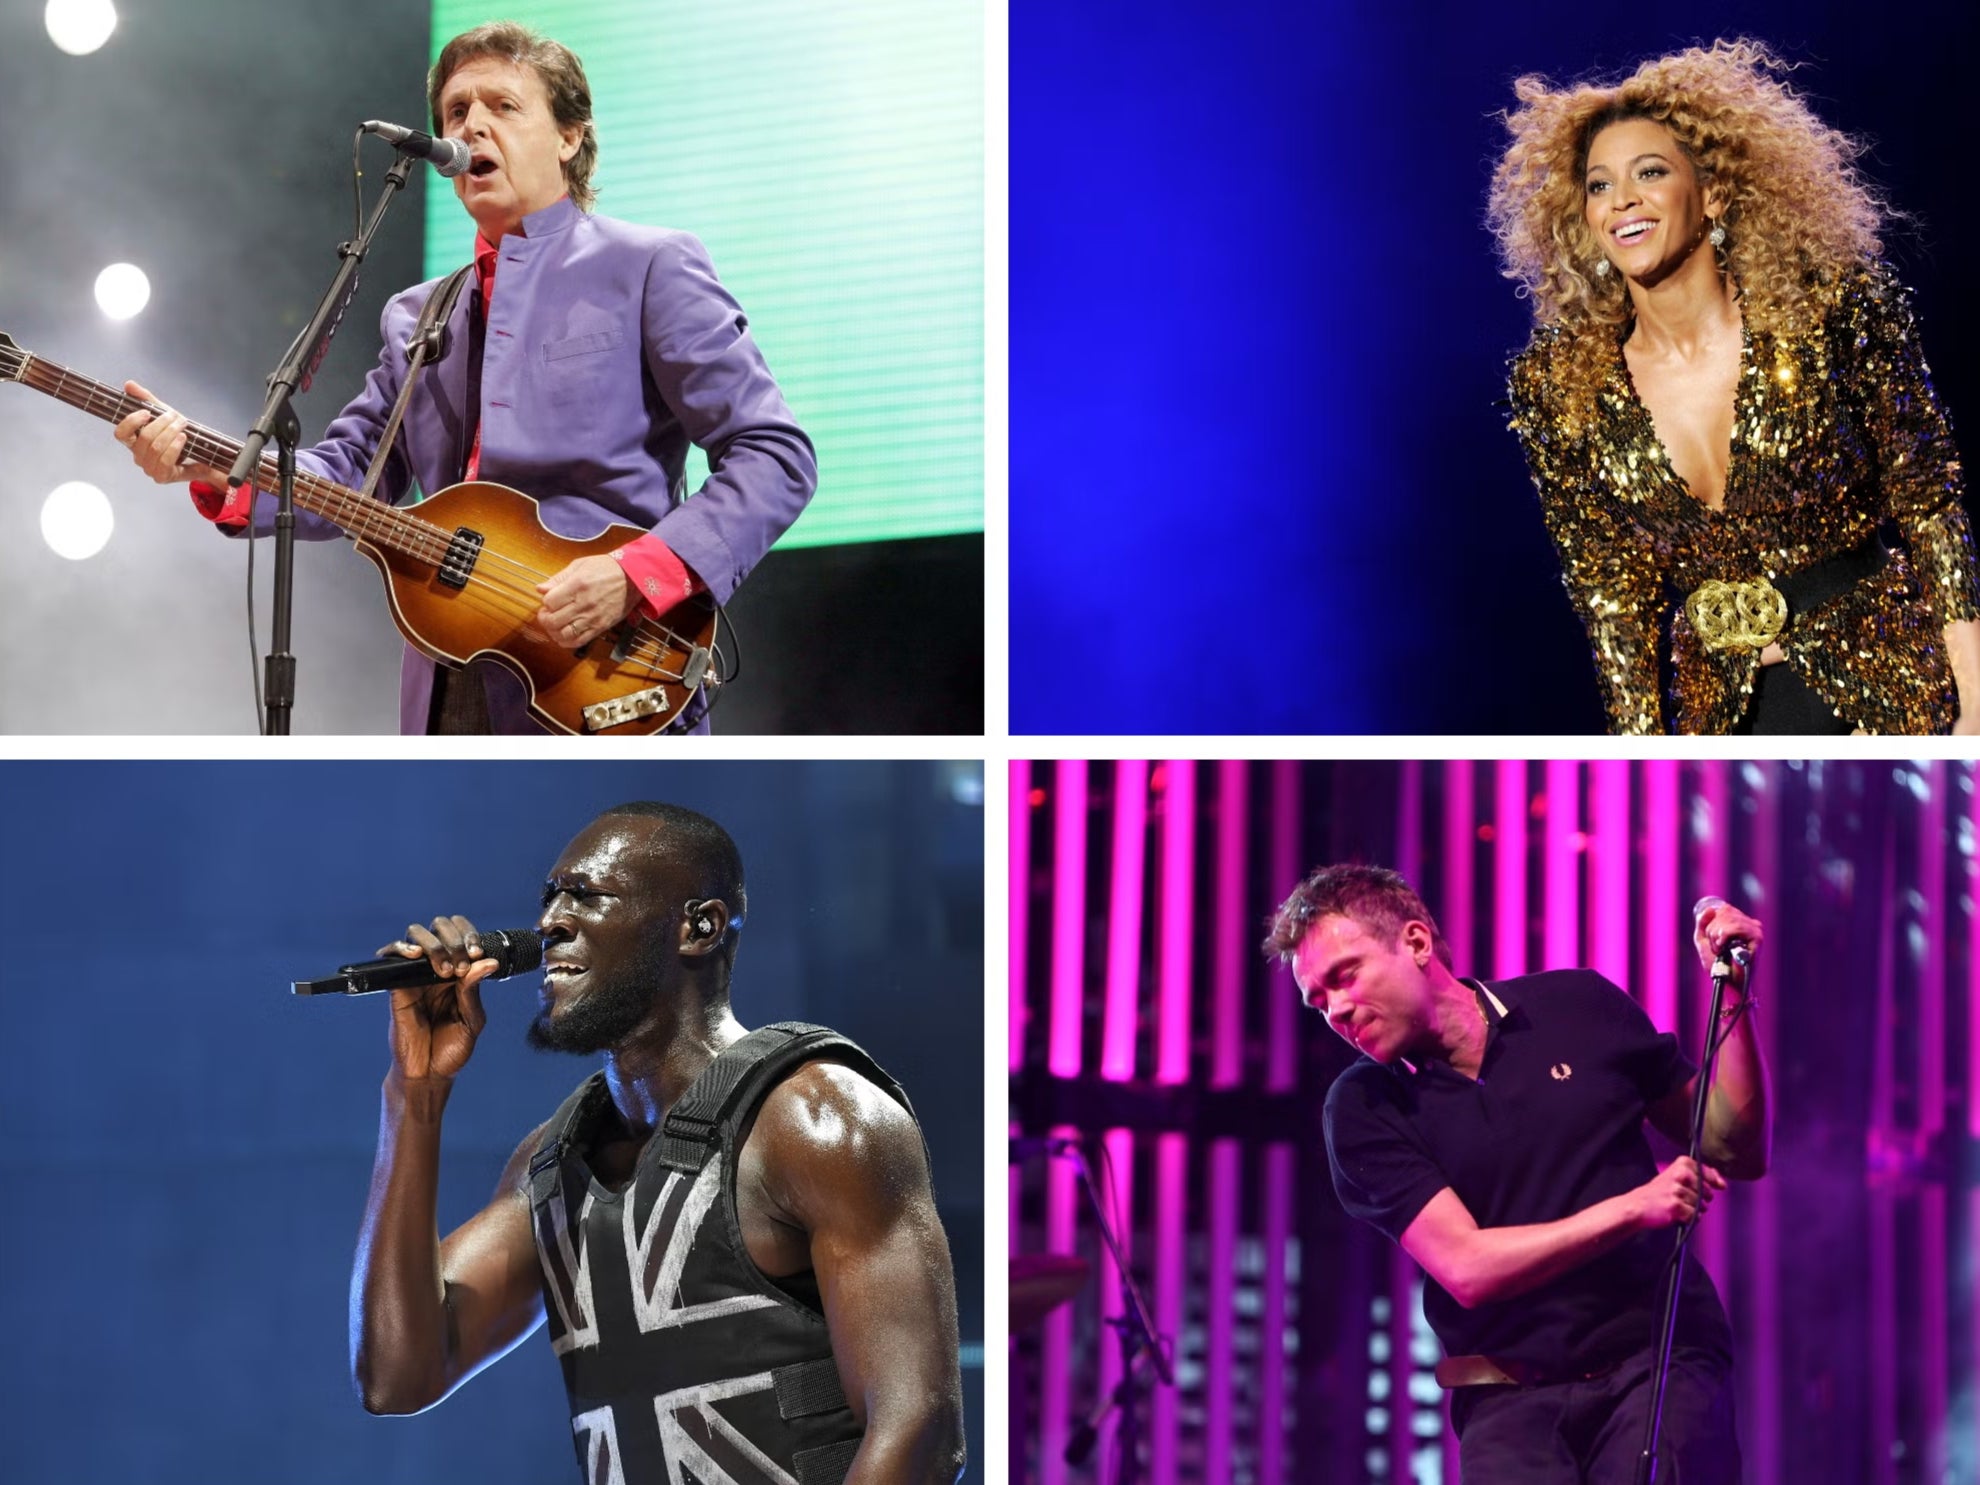 Leading from the front: (clockwise, from top left) Paul McCartney, Beyoncé, Damon Albarn of Blur, and Stormzy, during their headline performances on the Pyramid Stage